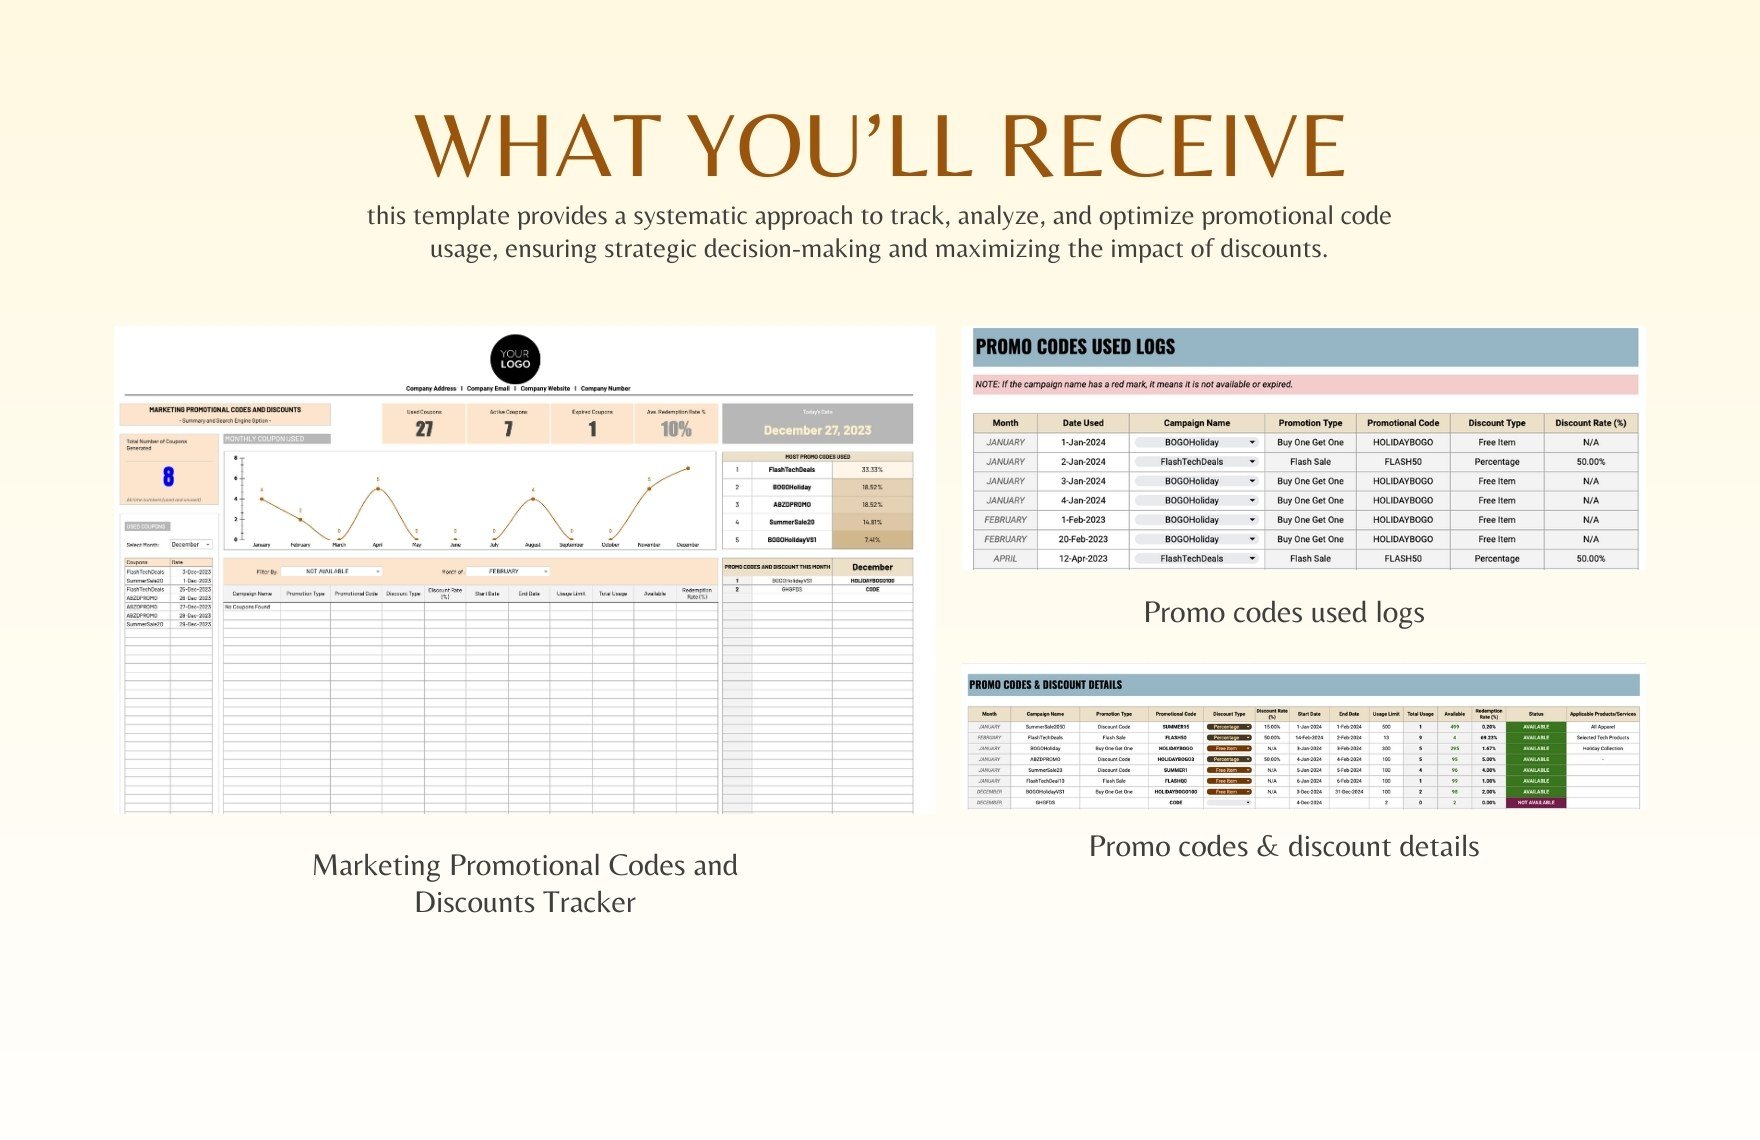 Marketing Promotional Codes and Discounts Tracker Template